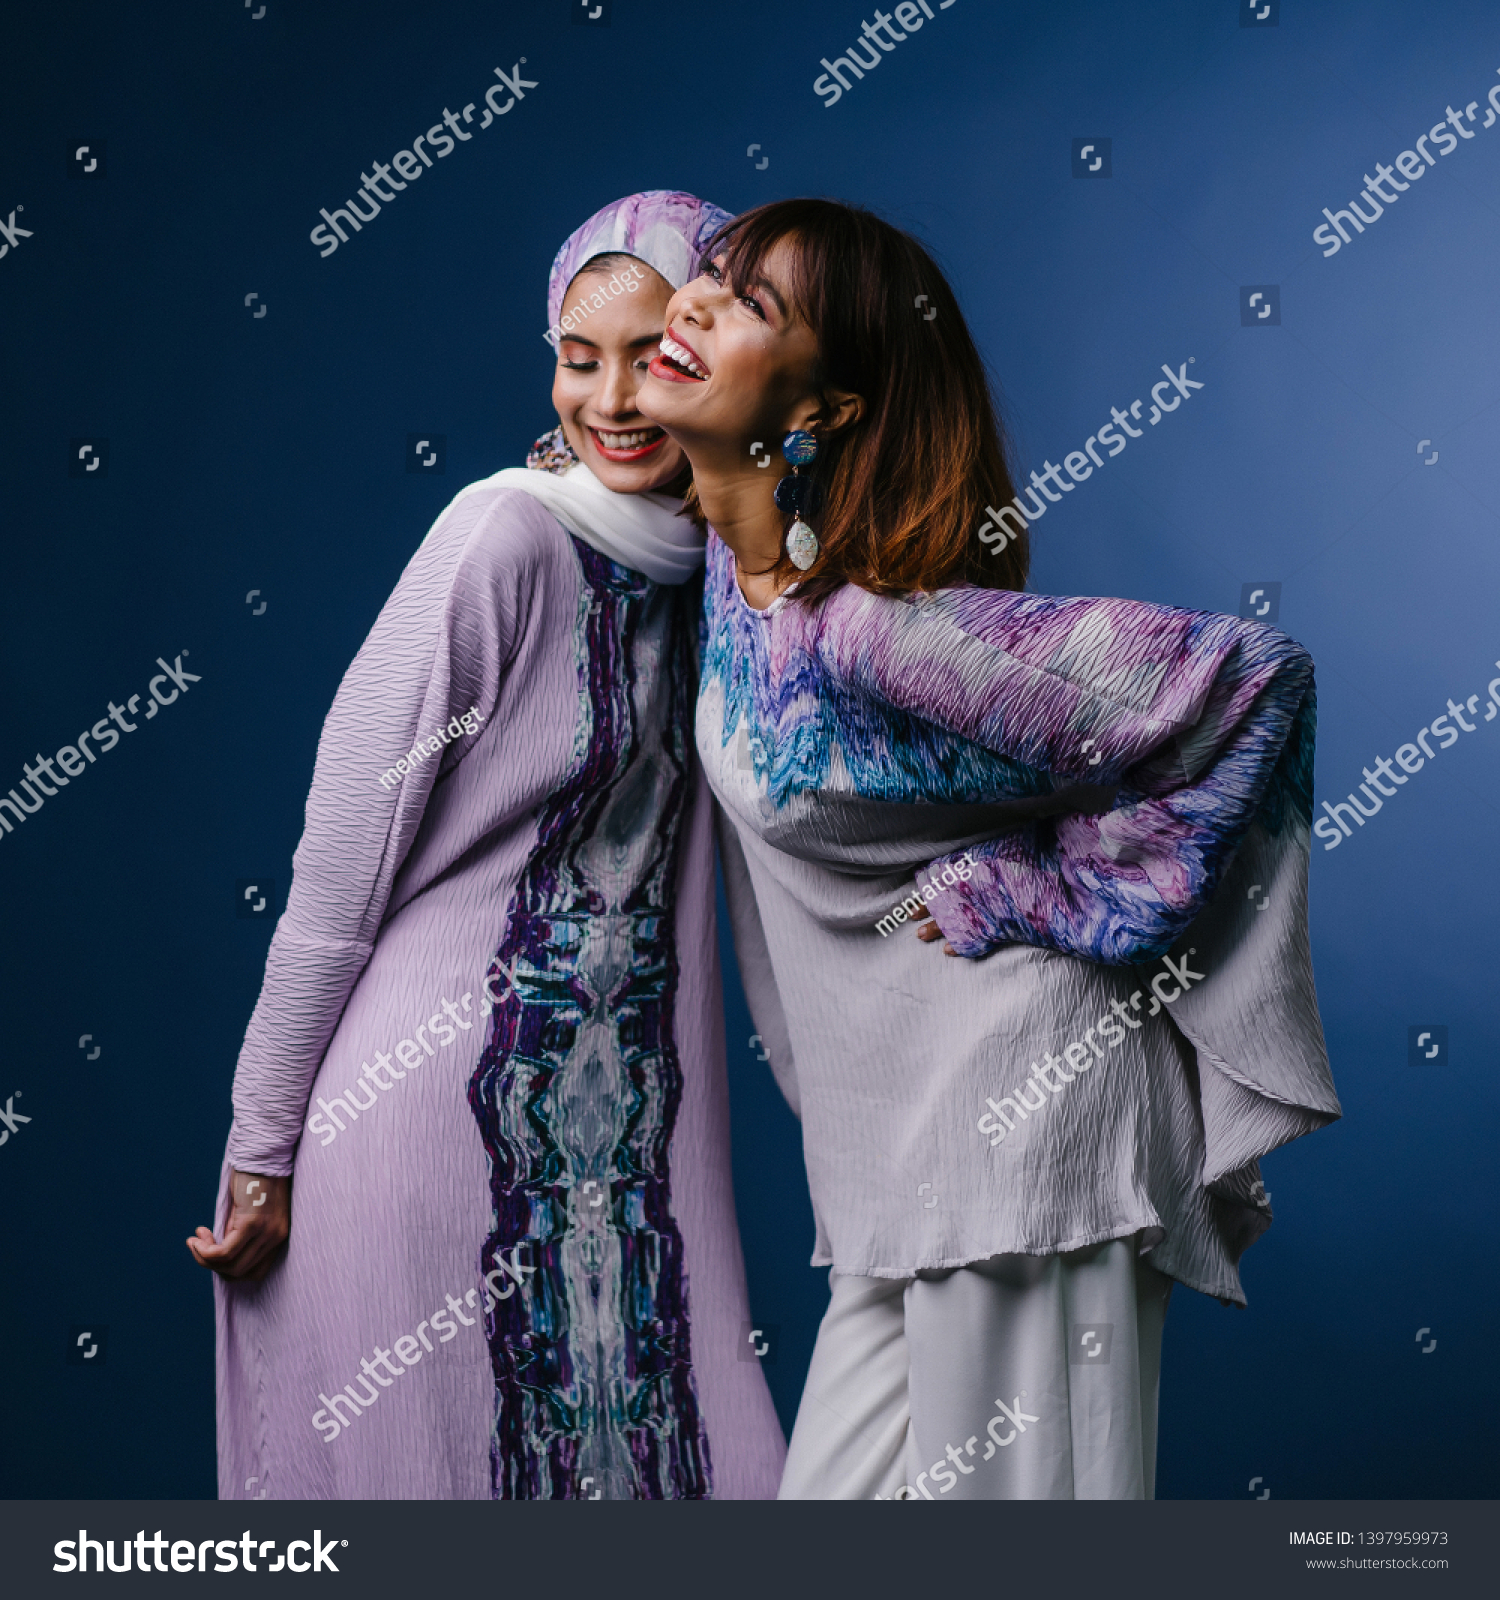 Portrait of two Middle Eastern Muslim women in festive ethnic Raya clothing posing in a studio. They are both young, attractive and beautiful. The women are friends or relatives.  #1397959973